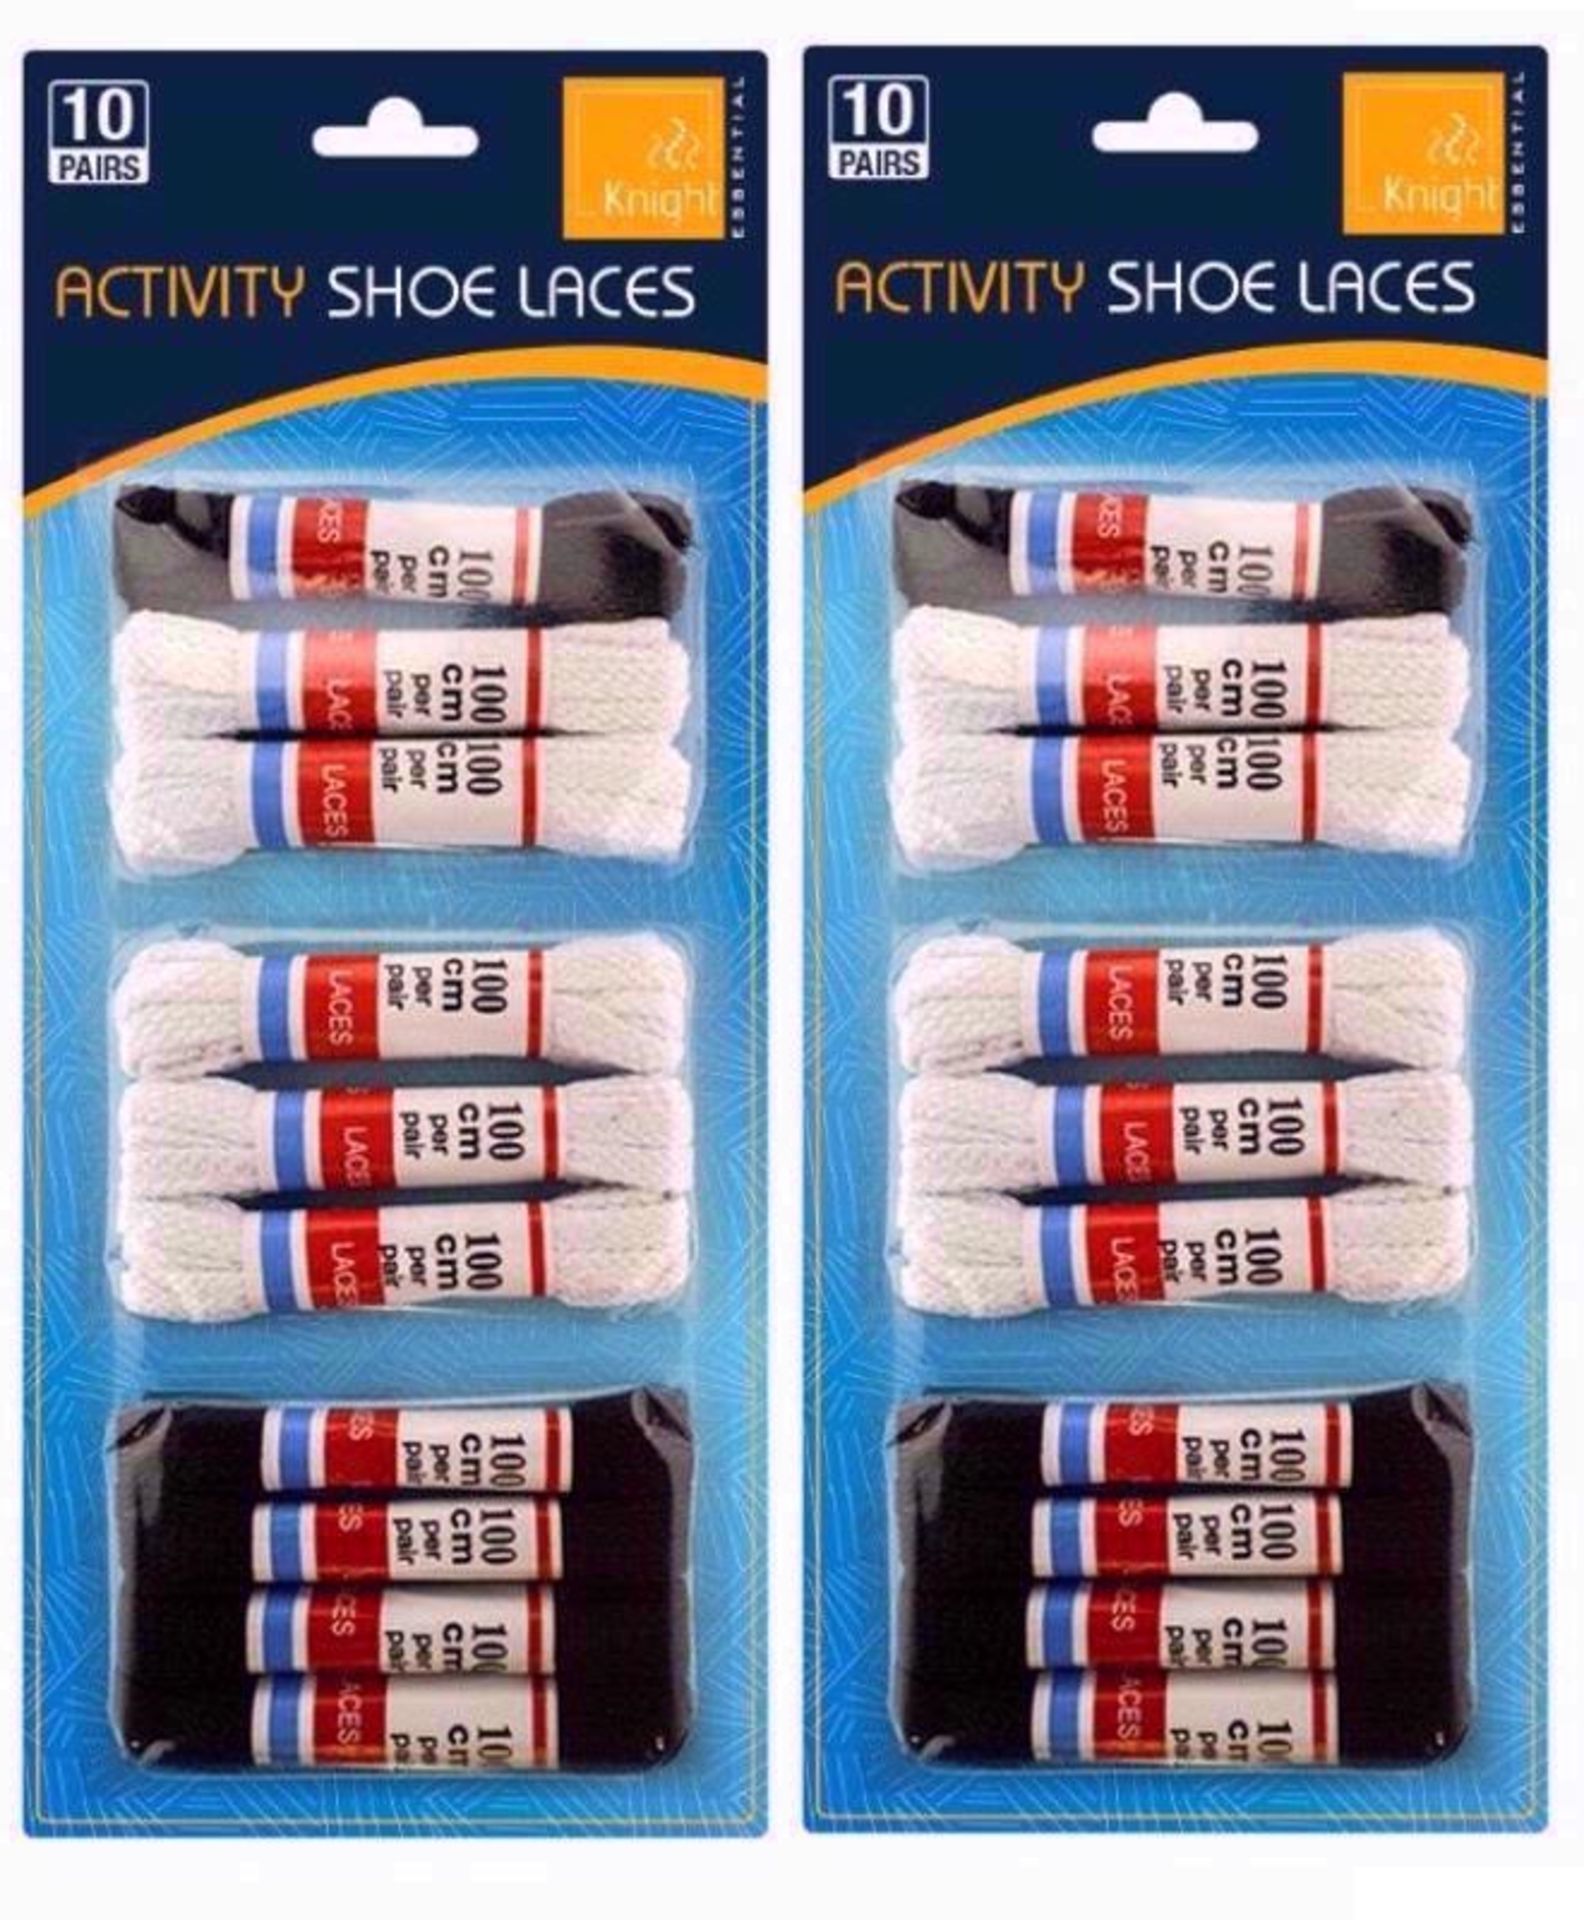 V *TRADE QTY* Brand New 2 Packs Of 10 Pairs Of Activity Shoe Laces - Includes 6 Black and 6 White